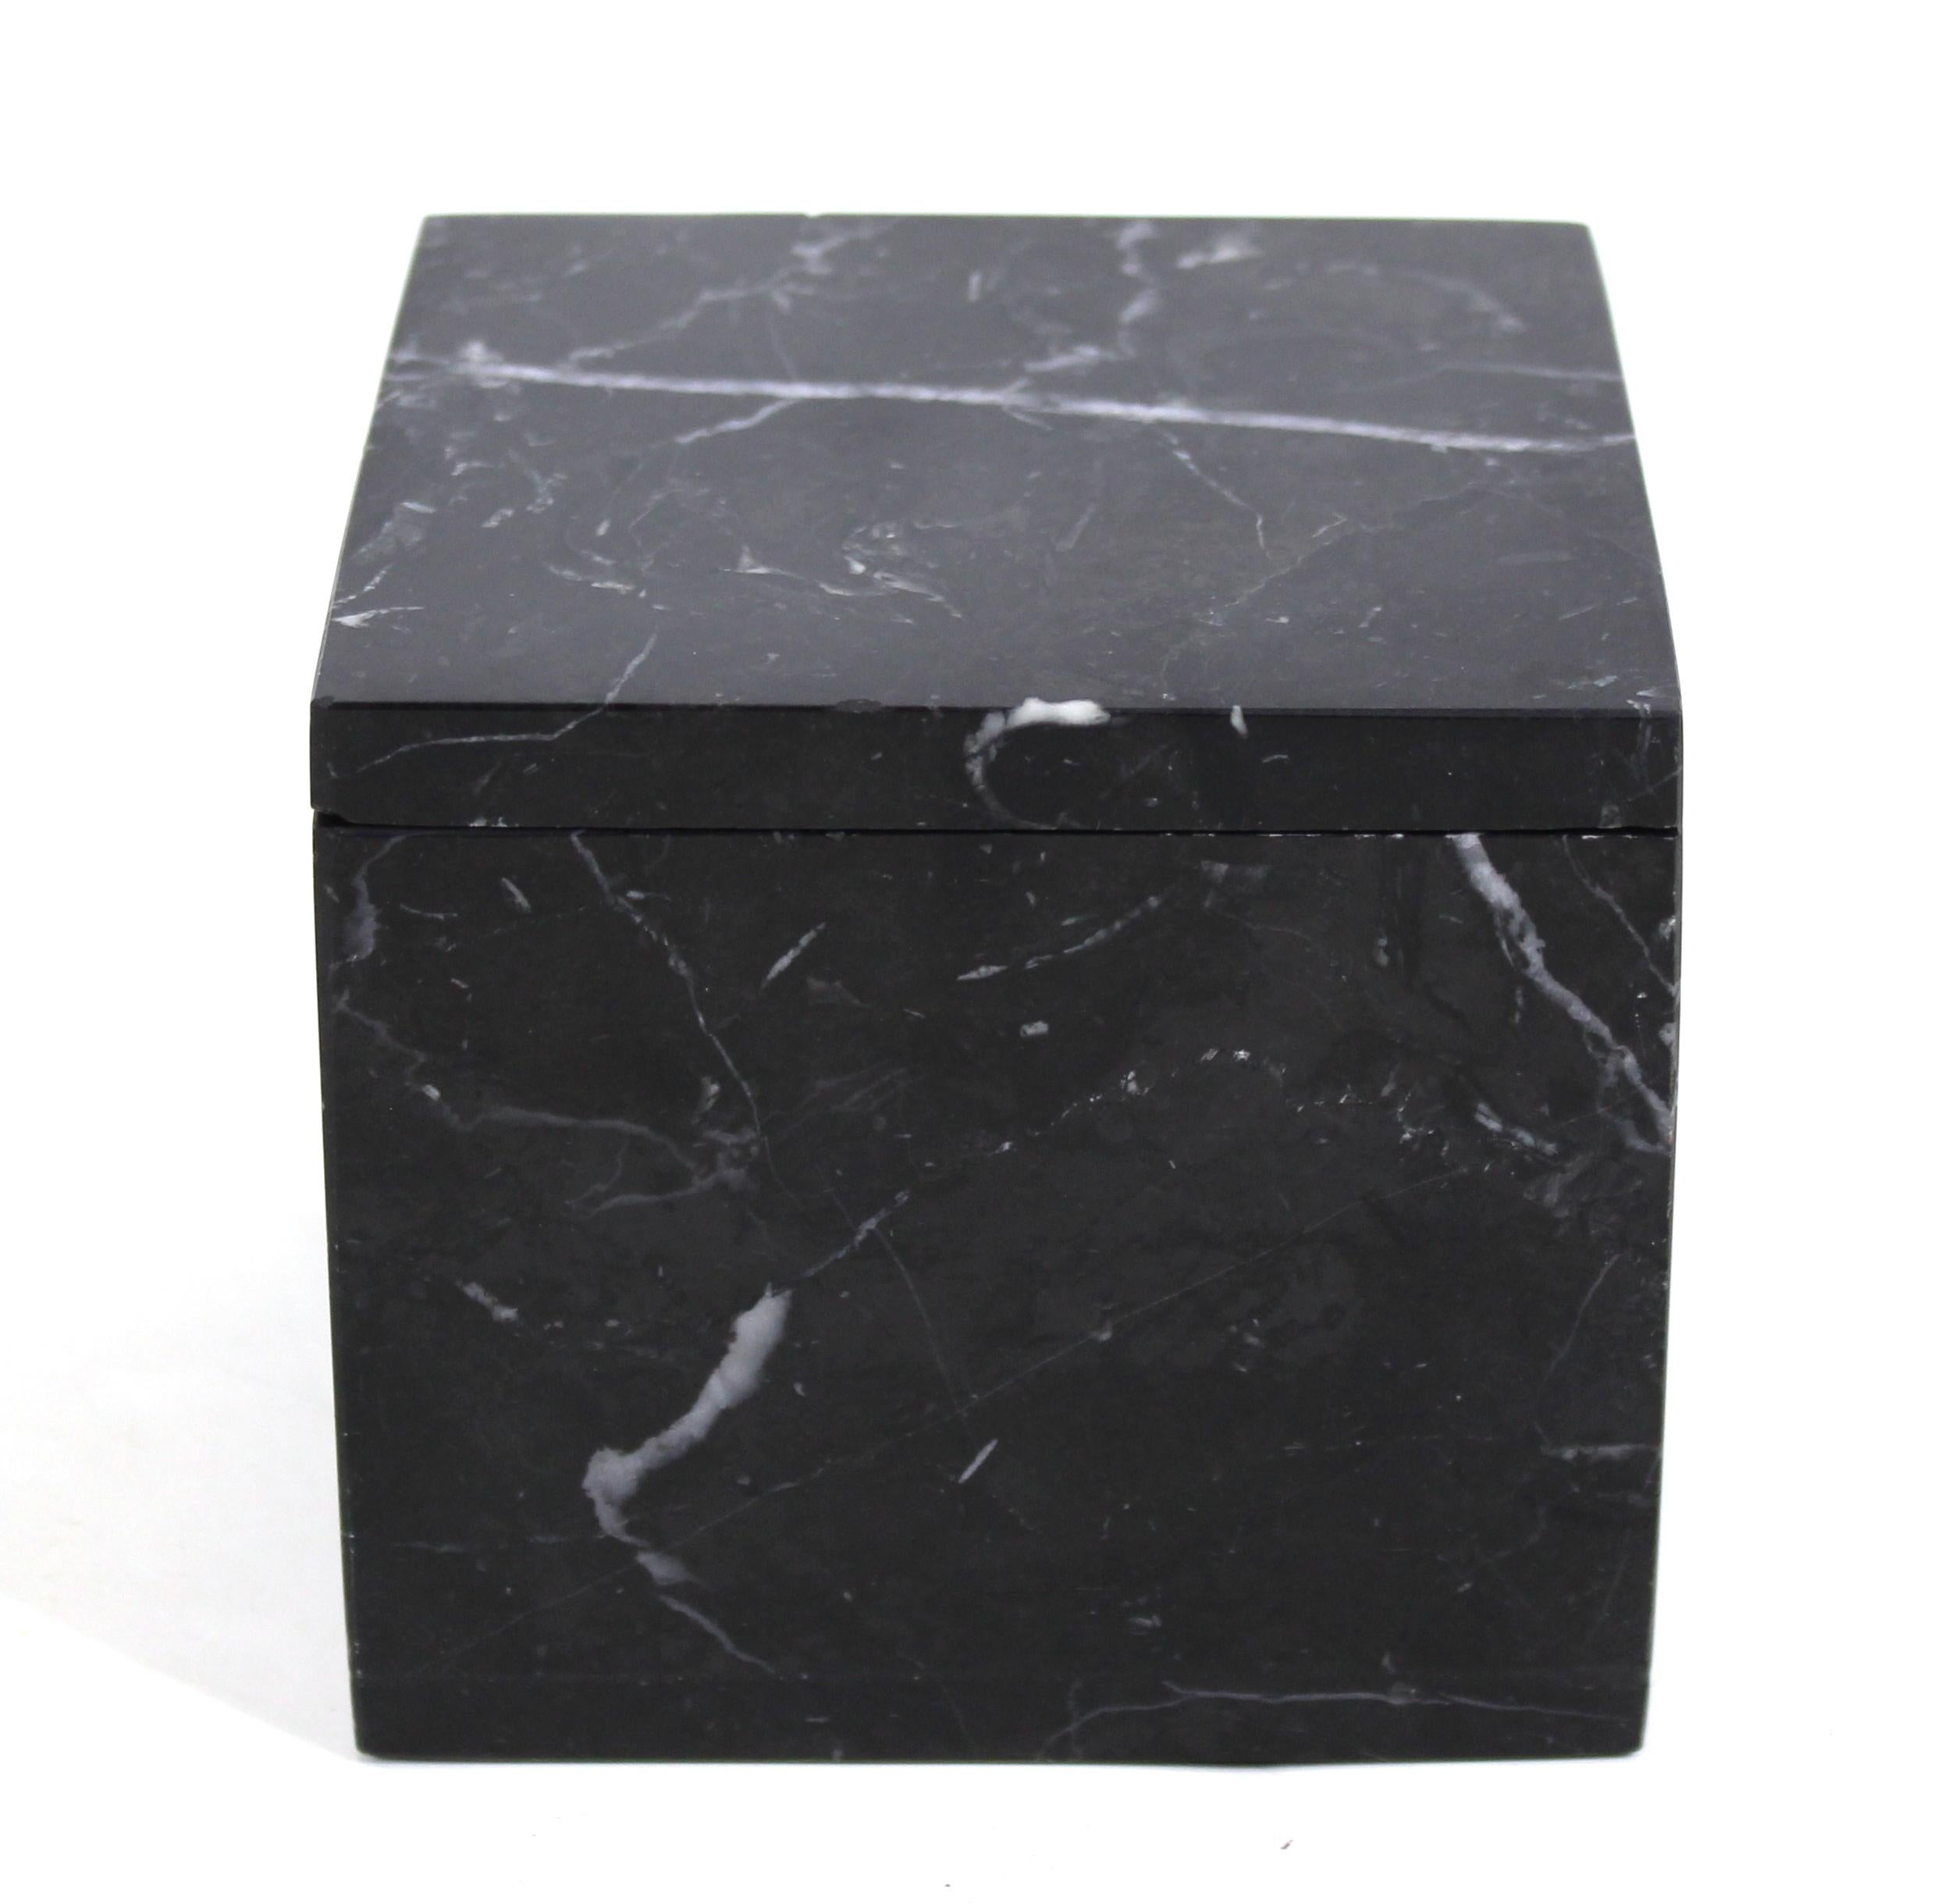 Modern marble trinket box in black veined Egyptian marble, with label on bottom.